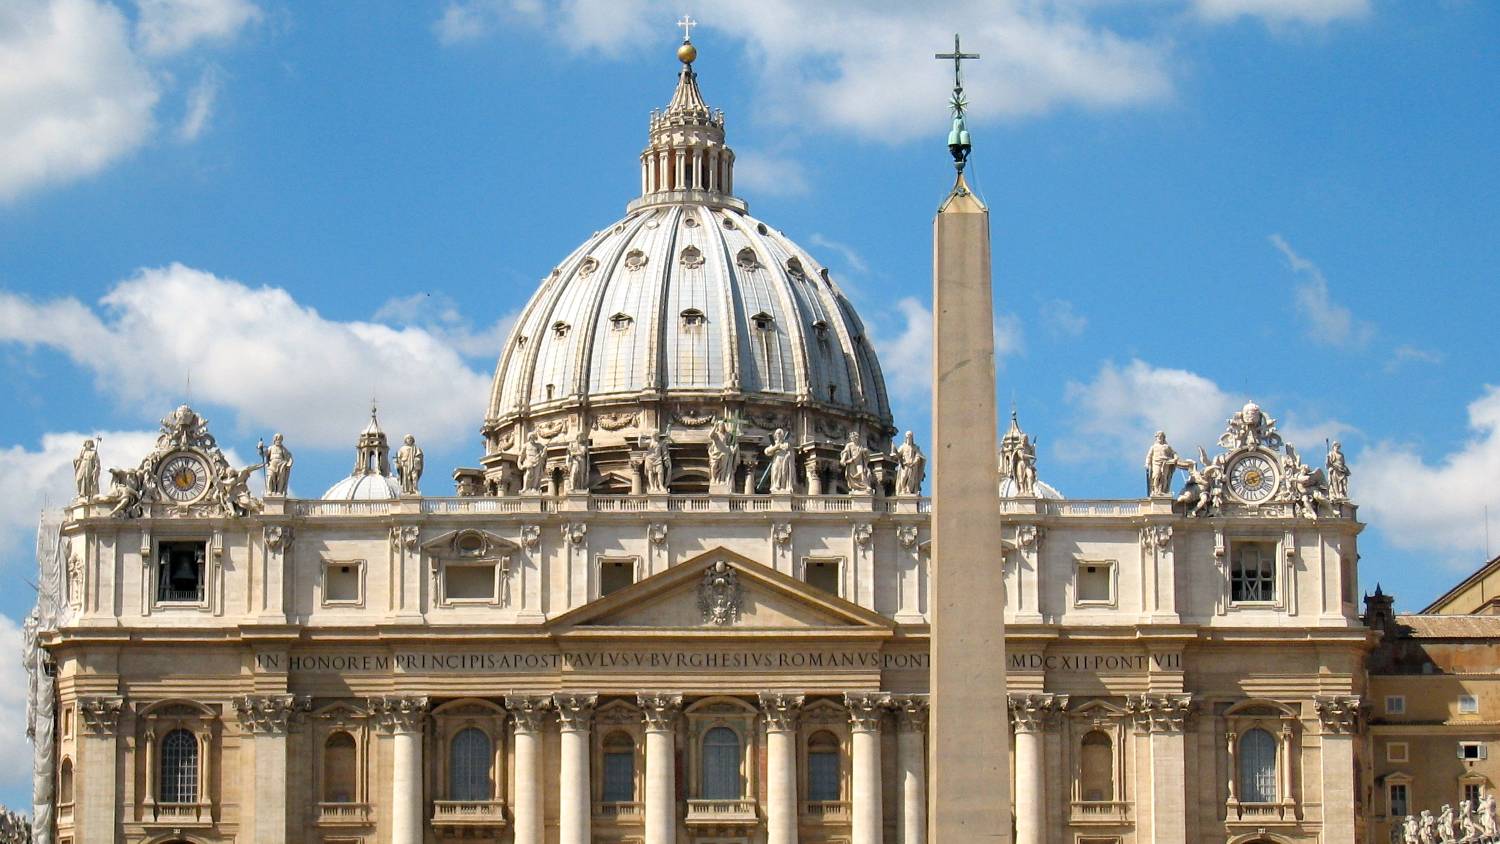 The Basilica took 150 years and is today visited by millions of worshippers (Creative Commons)